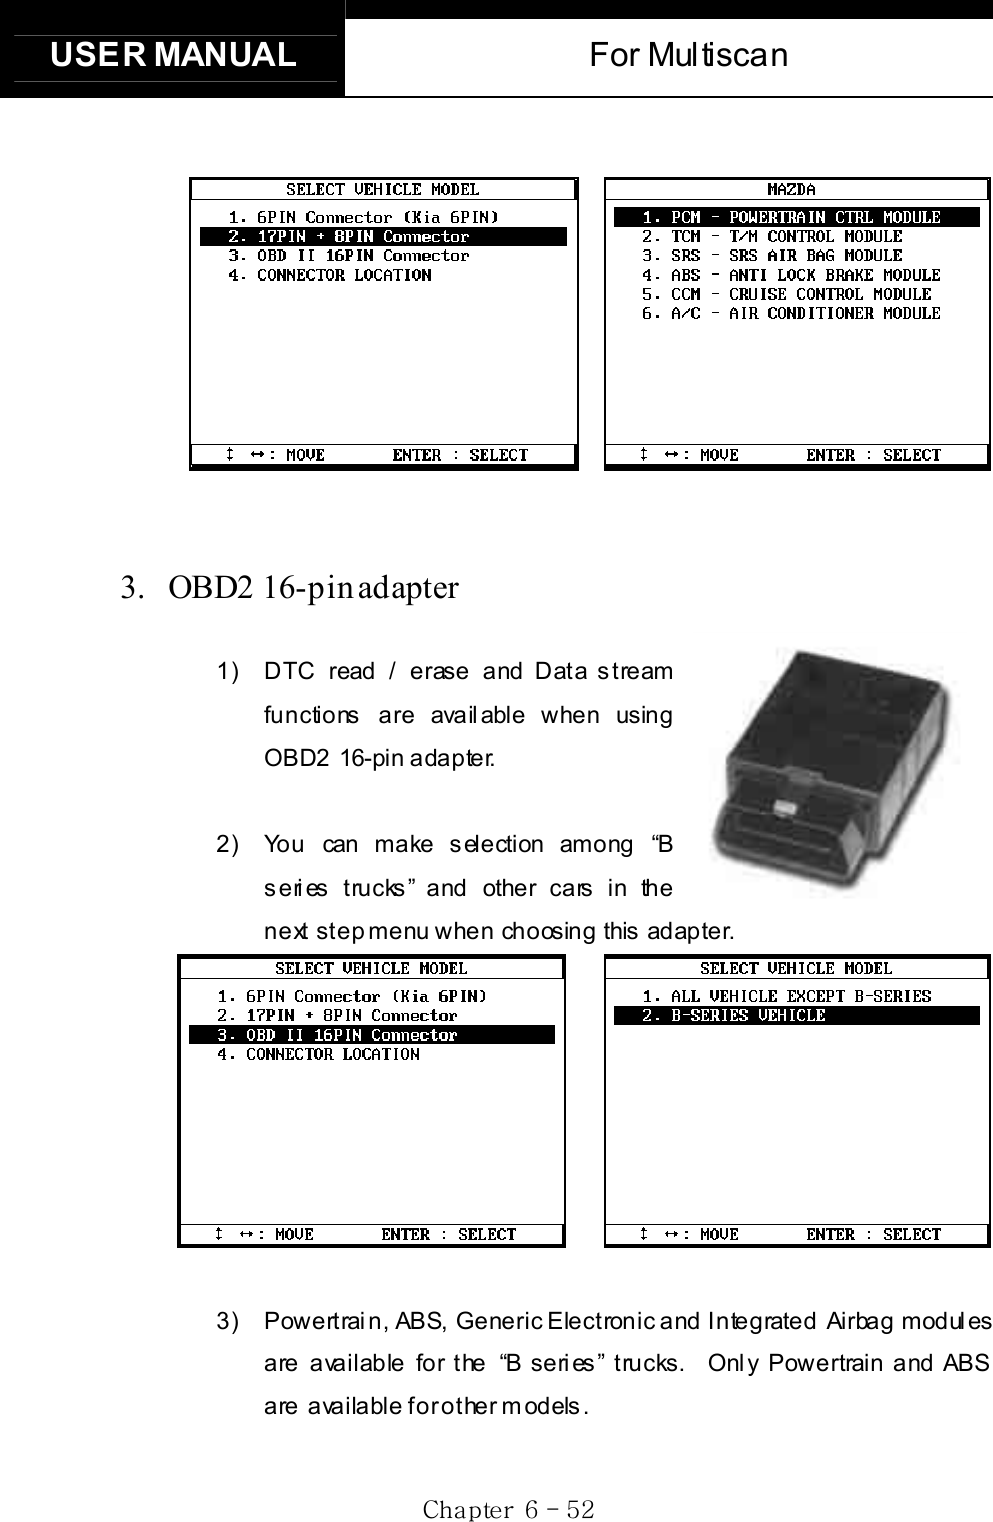 USER MANUAL  For Multiscan Gj G]G TG\YG3. OBD2 16-pin adapter1)  DTC read / erase and Data stream functions are available when using OBD2 16-pin adapter.   2)  You can make selection among “B s eri es t rucks ” and other cars  in the next step menu when choosing this adapter. 3)    Powertrain, ABS, Generic Electronic and Integrated Airbag modules     are available for the “B series” trucks.  Only Powertrain and ABS are  available for other models. 